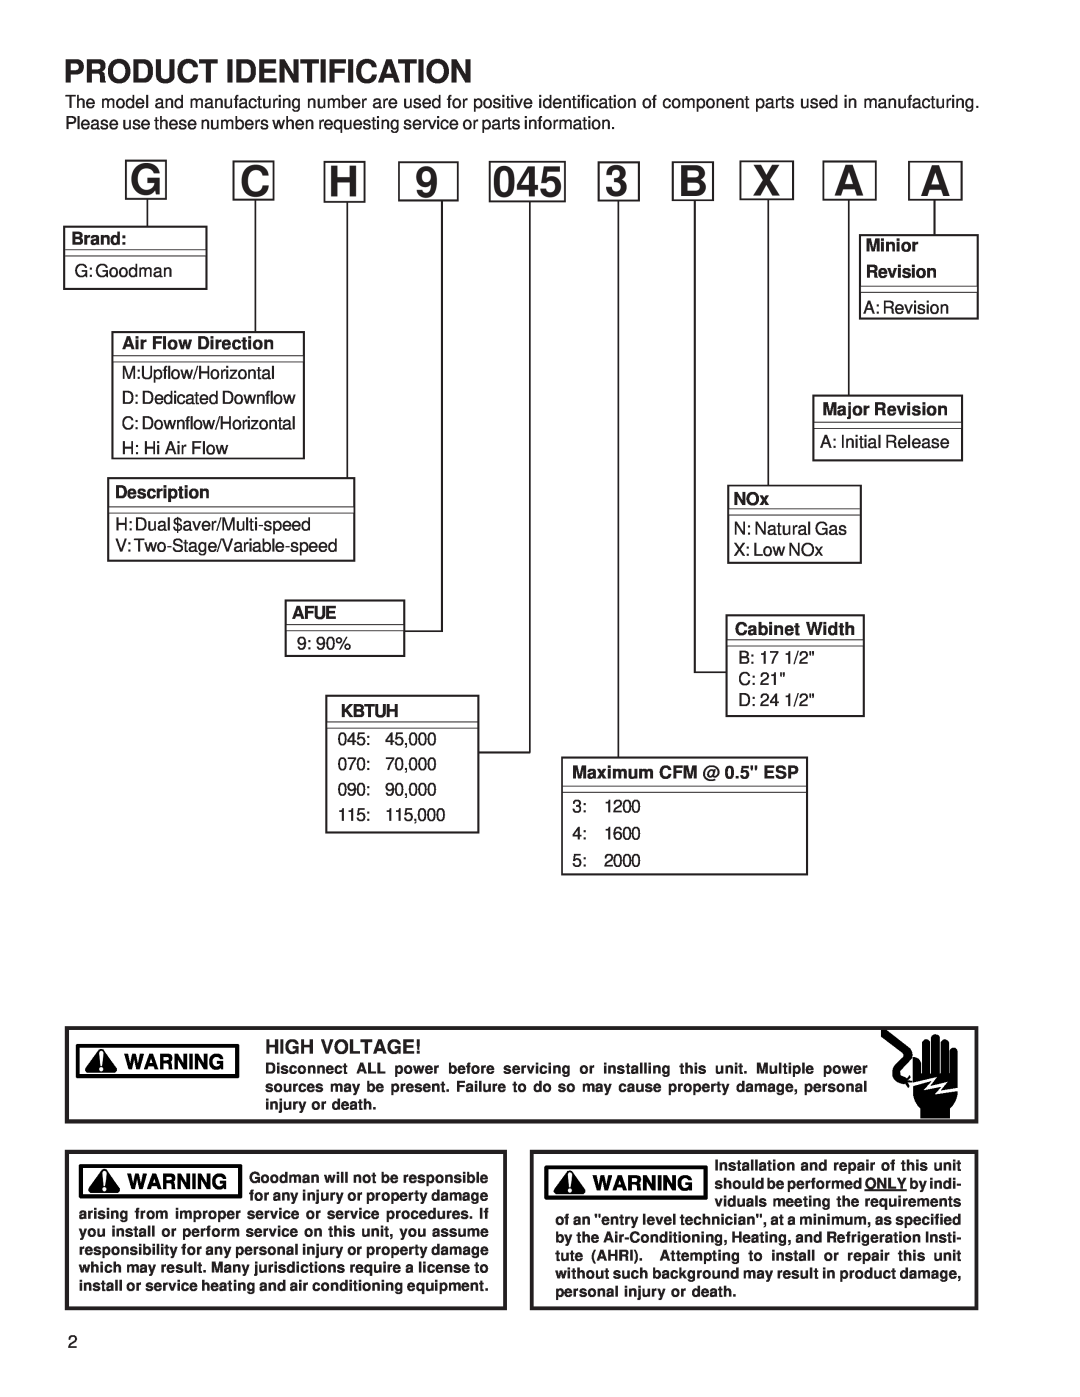 Goodman Mfg GCH9 service manual X A A, Product Identification, High Voltage 